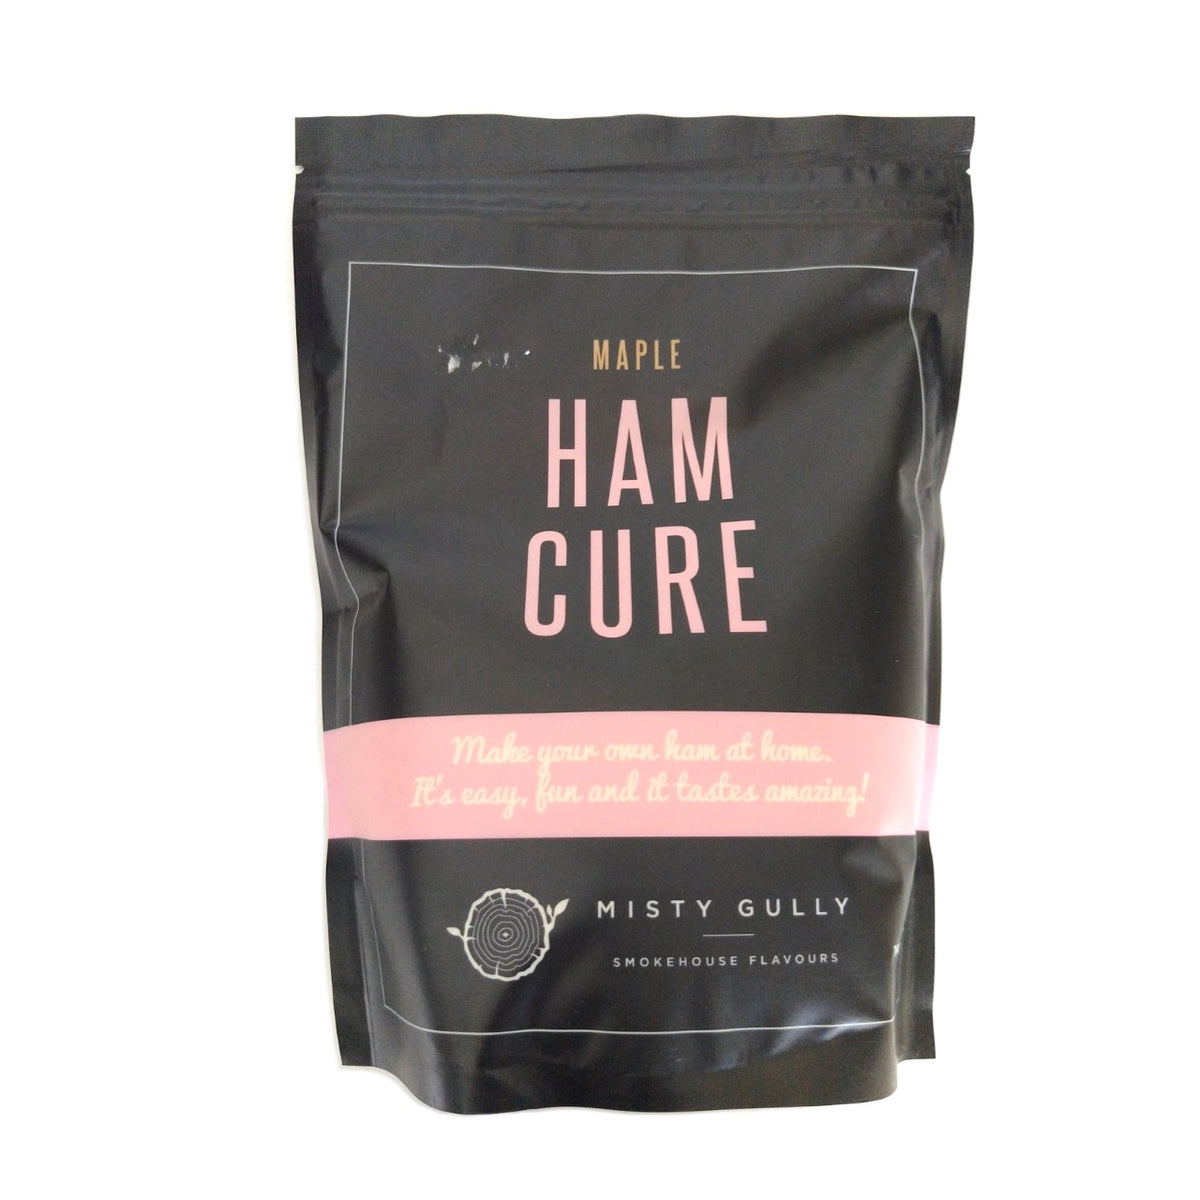 Misty Gully Maple Ham Cure 1kg Packet